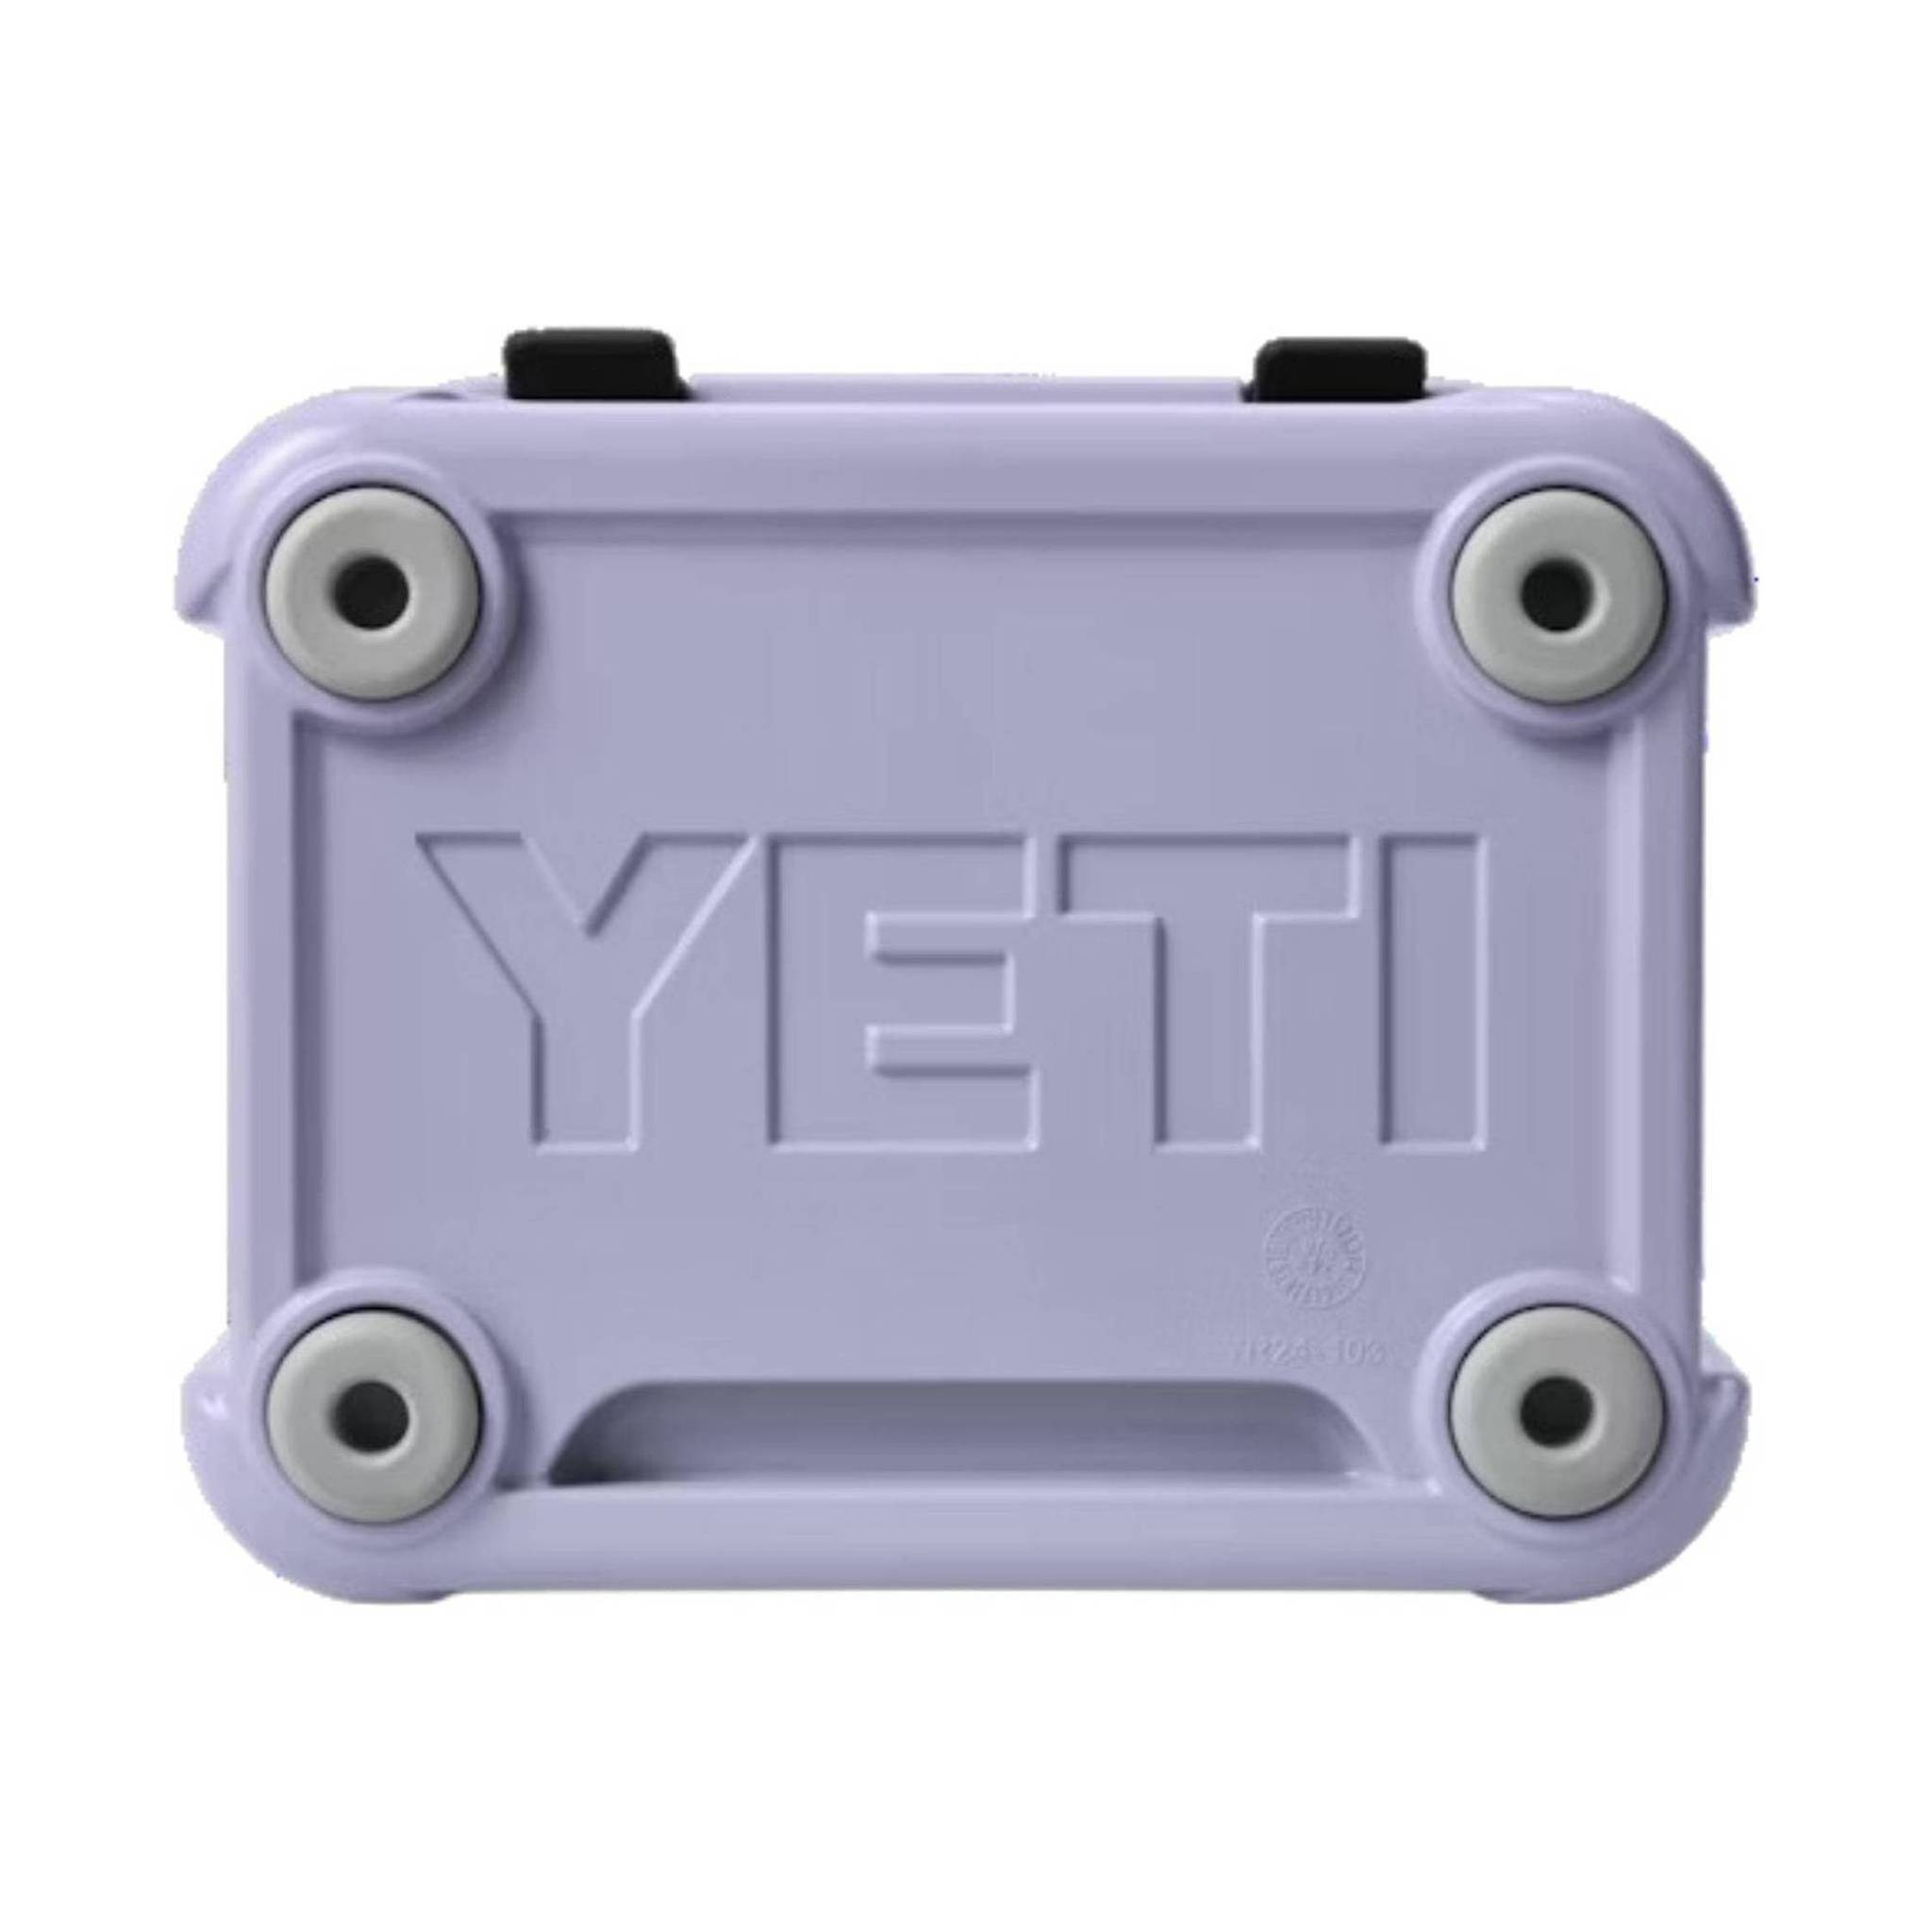 Find great online shopping at affordable prices using YETI Roadie 24 - Nordic  Blue YETI